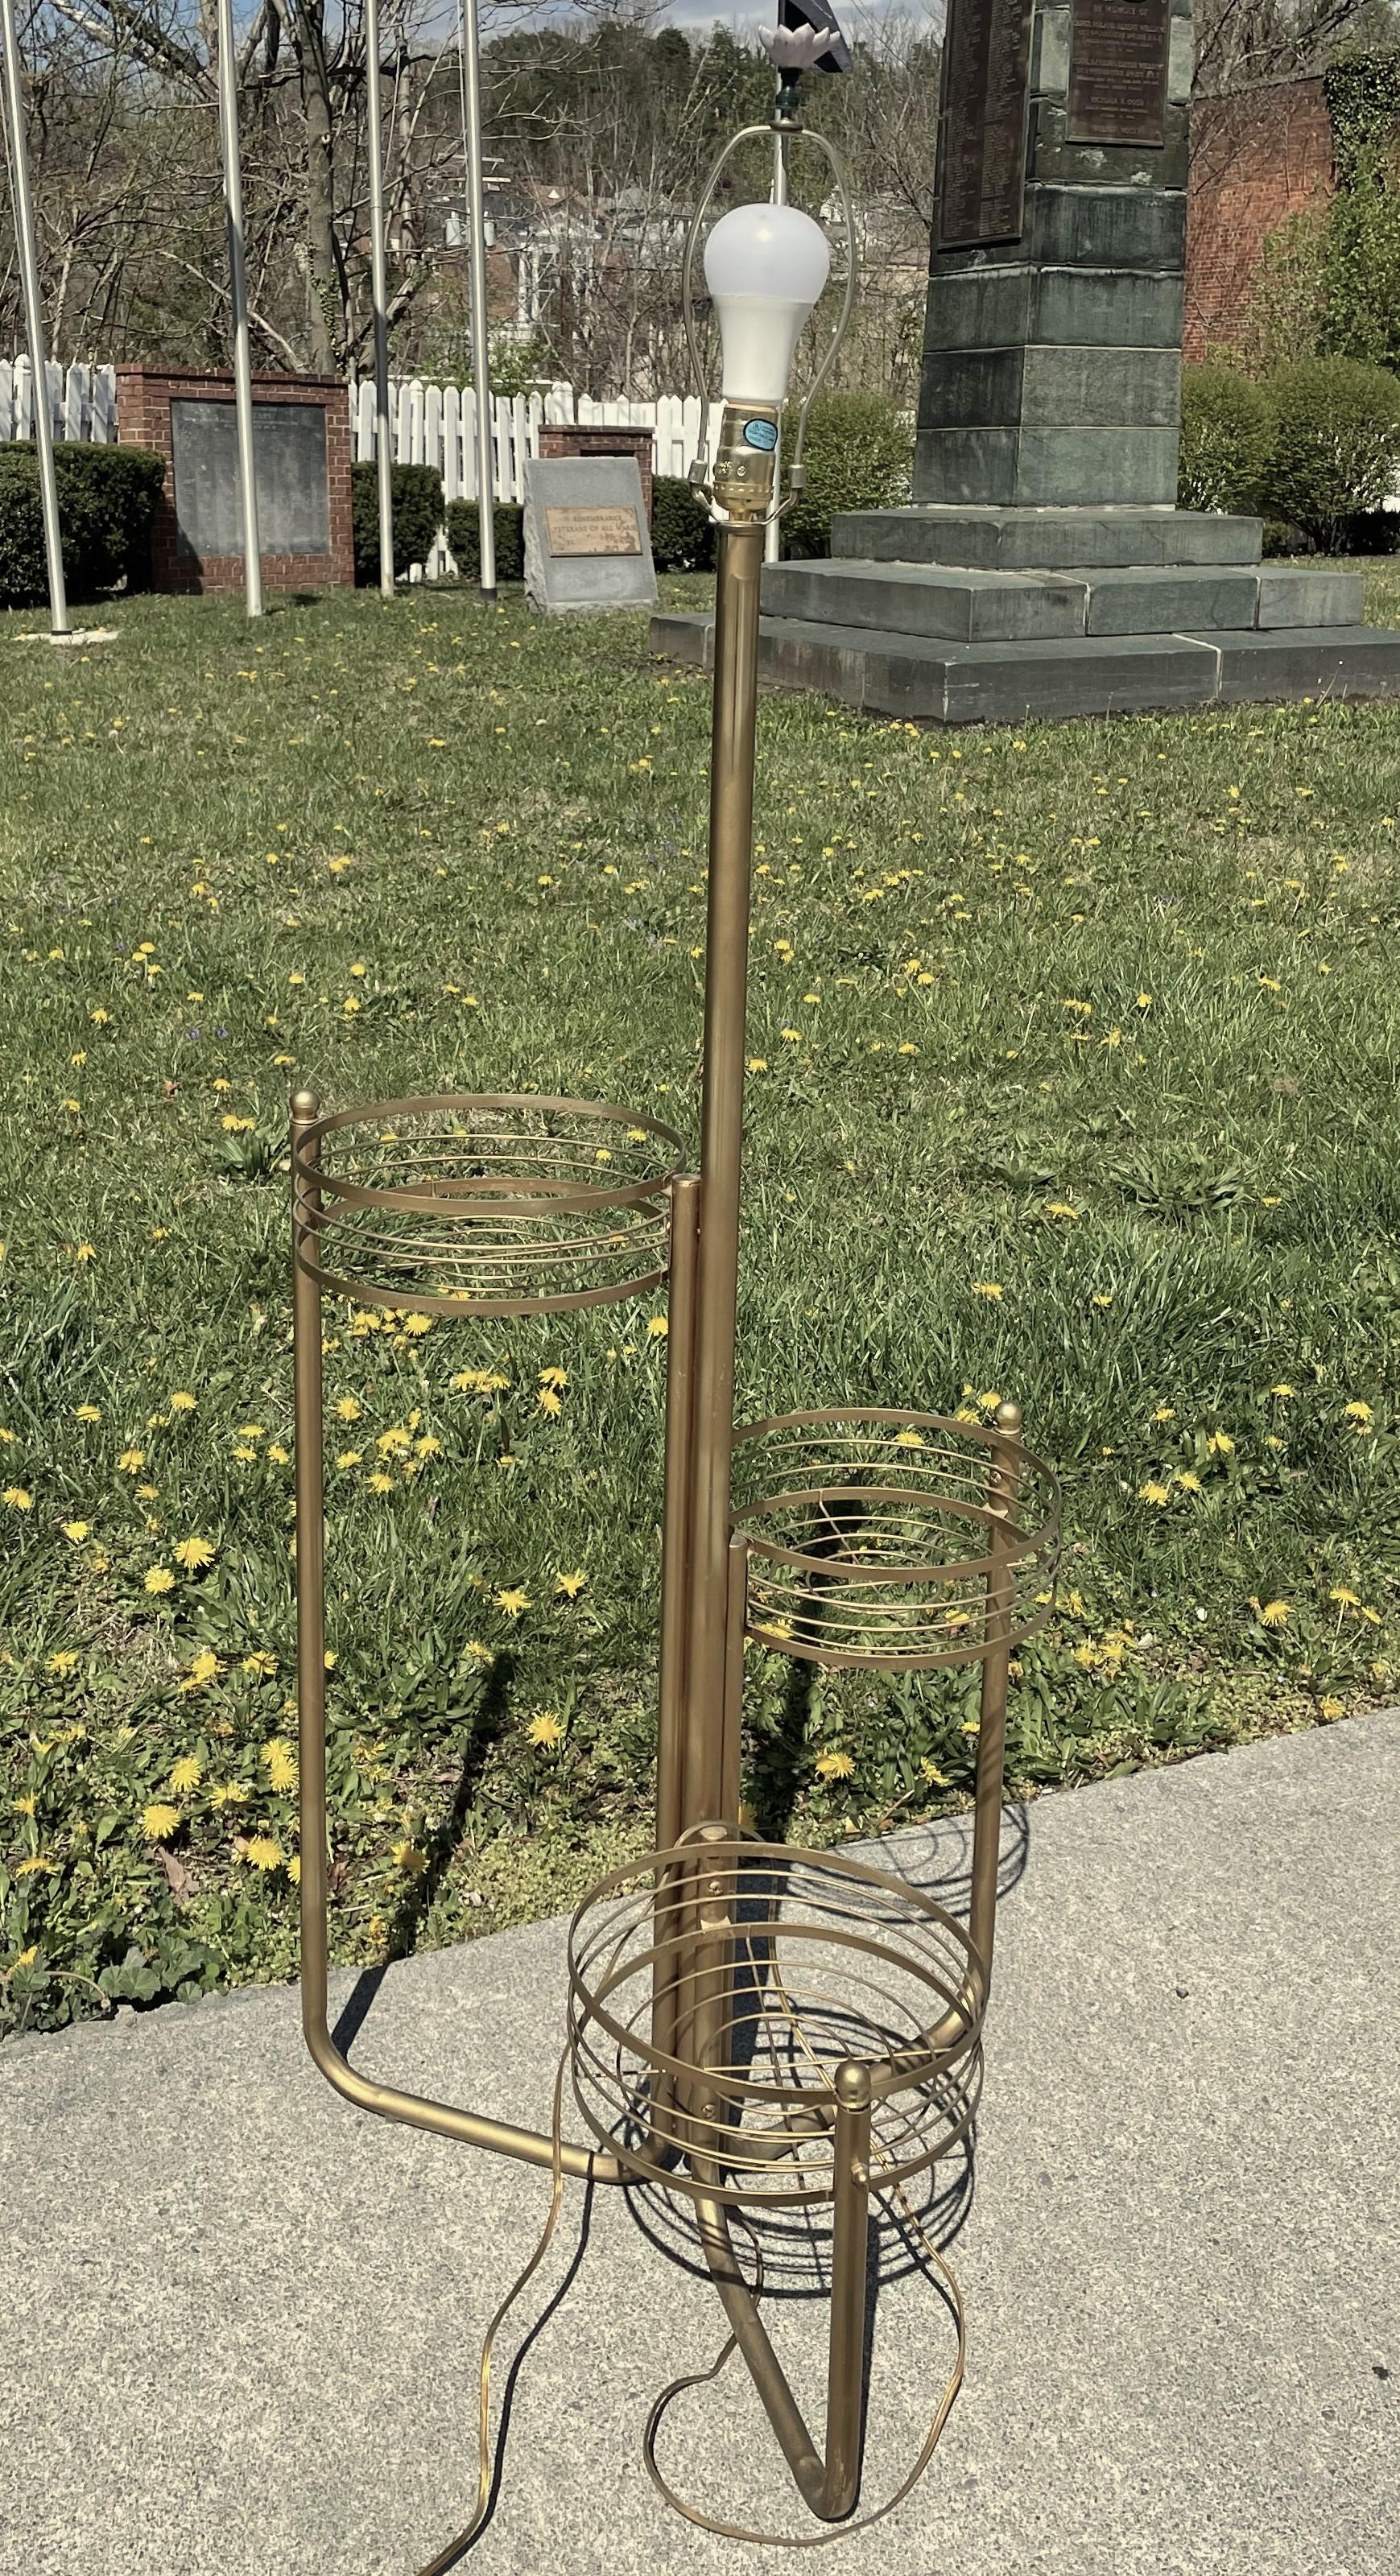 i can imagine this floor lamp decorated in many wonderful ways most logically trailing or flowering plants but these baskets can display almost anything you can think of. 

The lamp is 56 inches tall to the finial and 20 inches wide to the outside